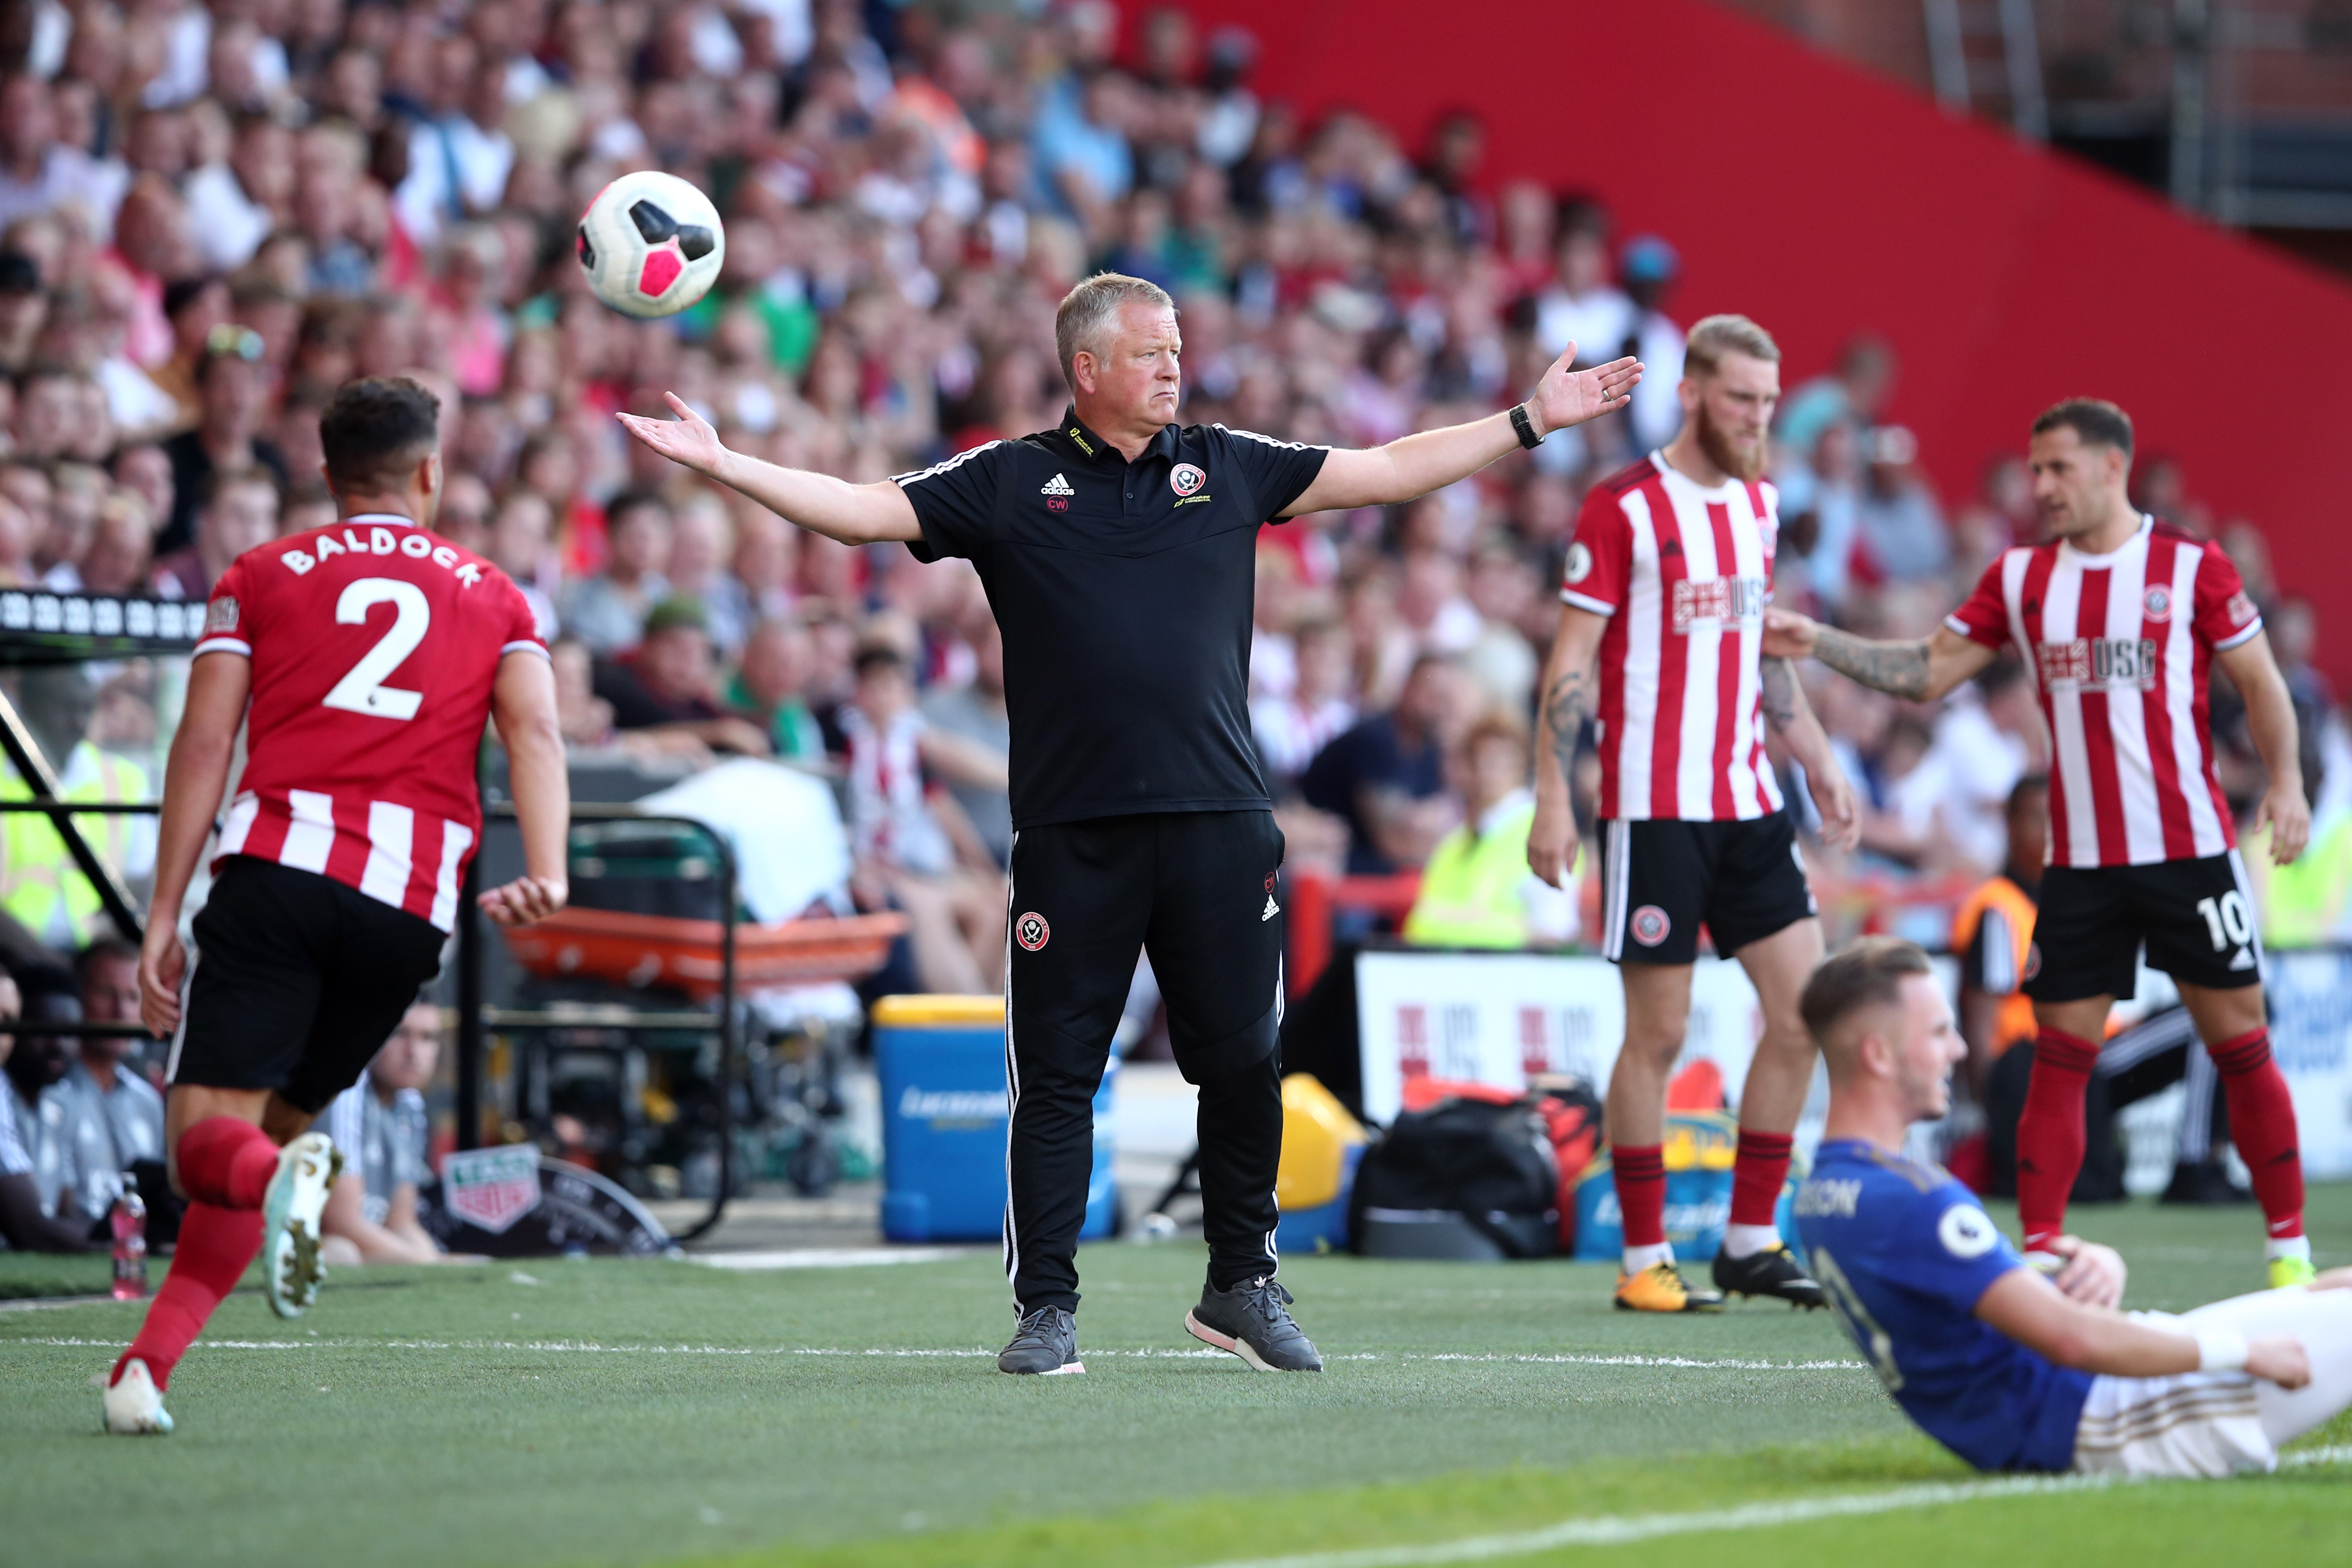 Sheffield United have looked out of sorts so far in 2020/21. (Photo by Marc Atkins/Getty Images)